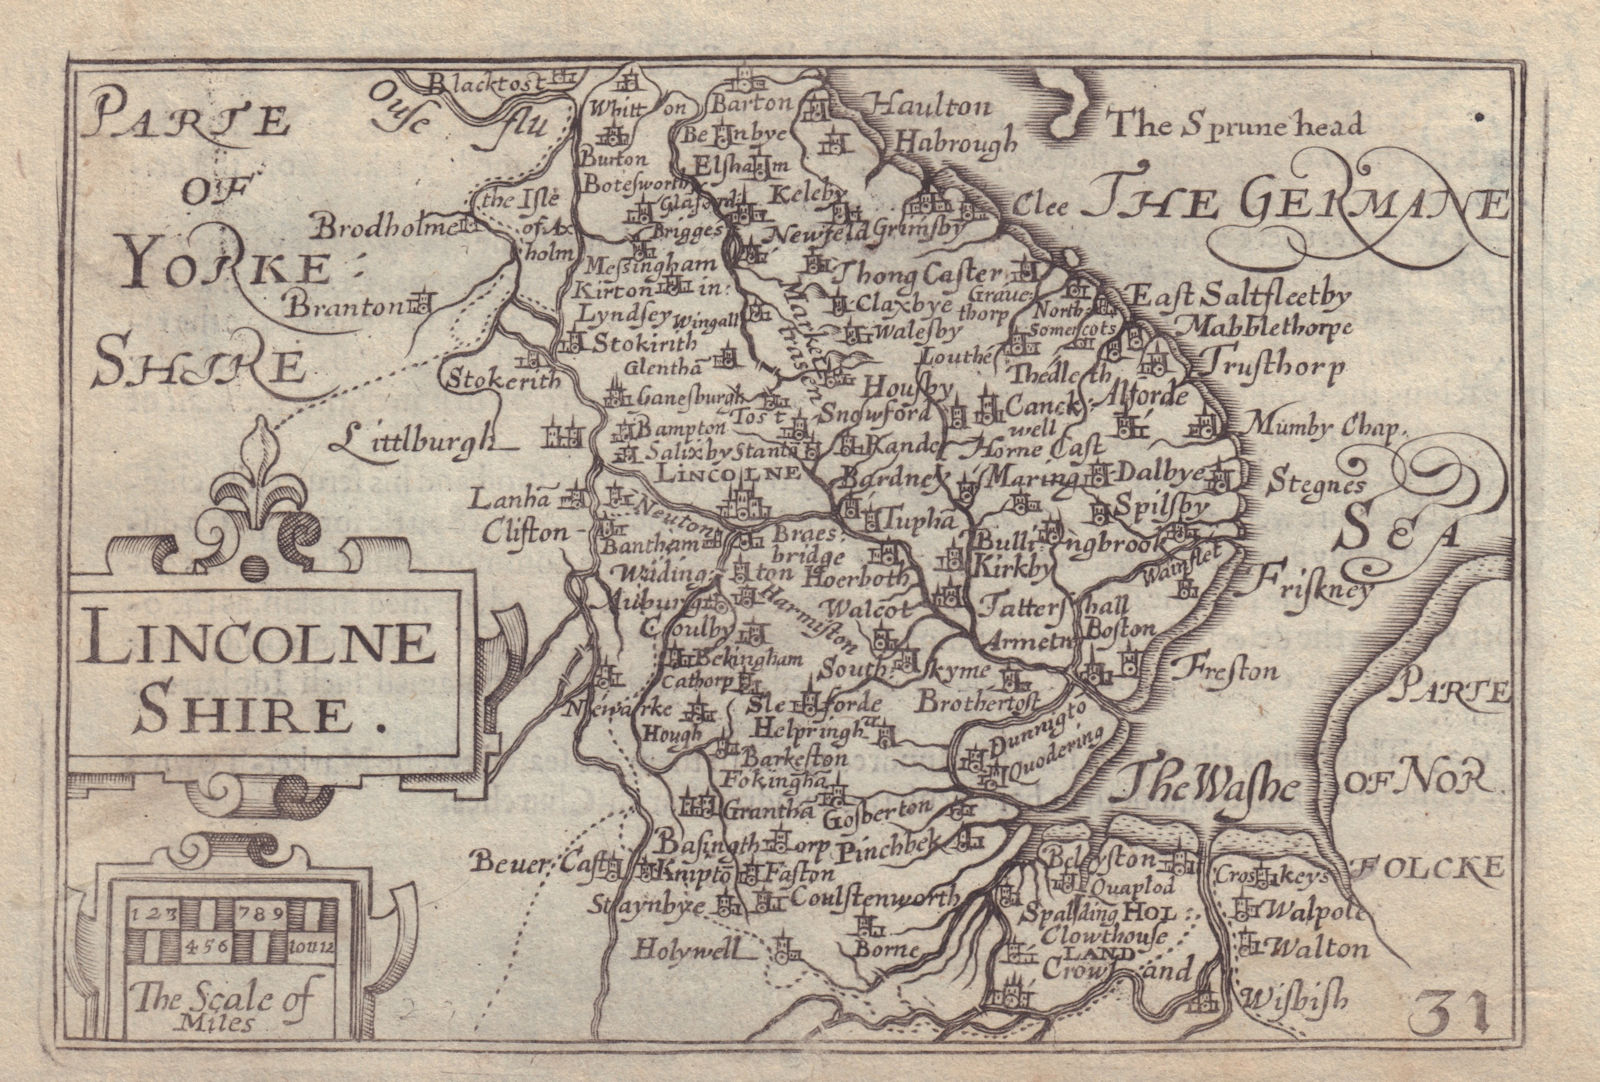 Lincolne Shire by van den Keere. "Speed miniature" Lincolnshire county map 1632